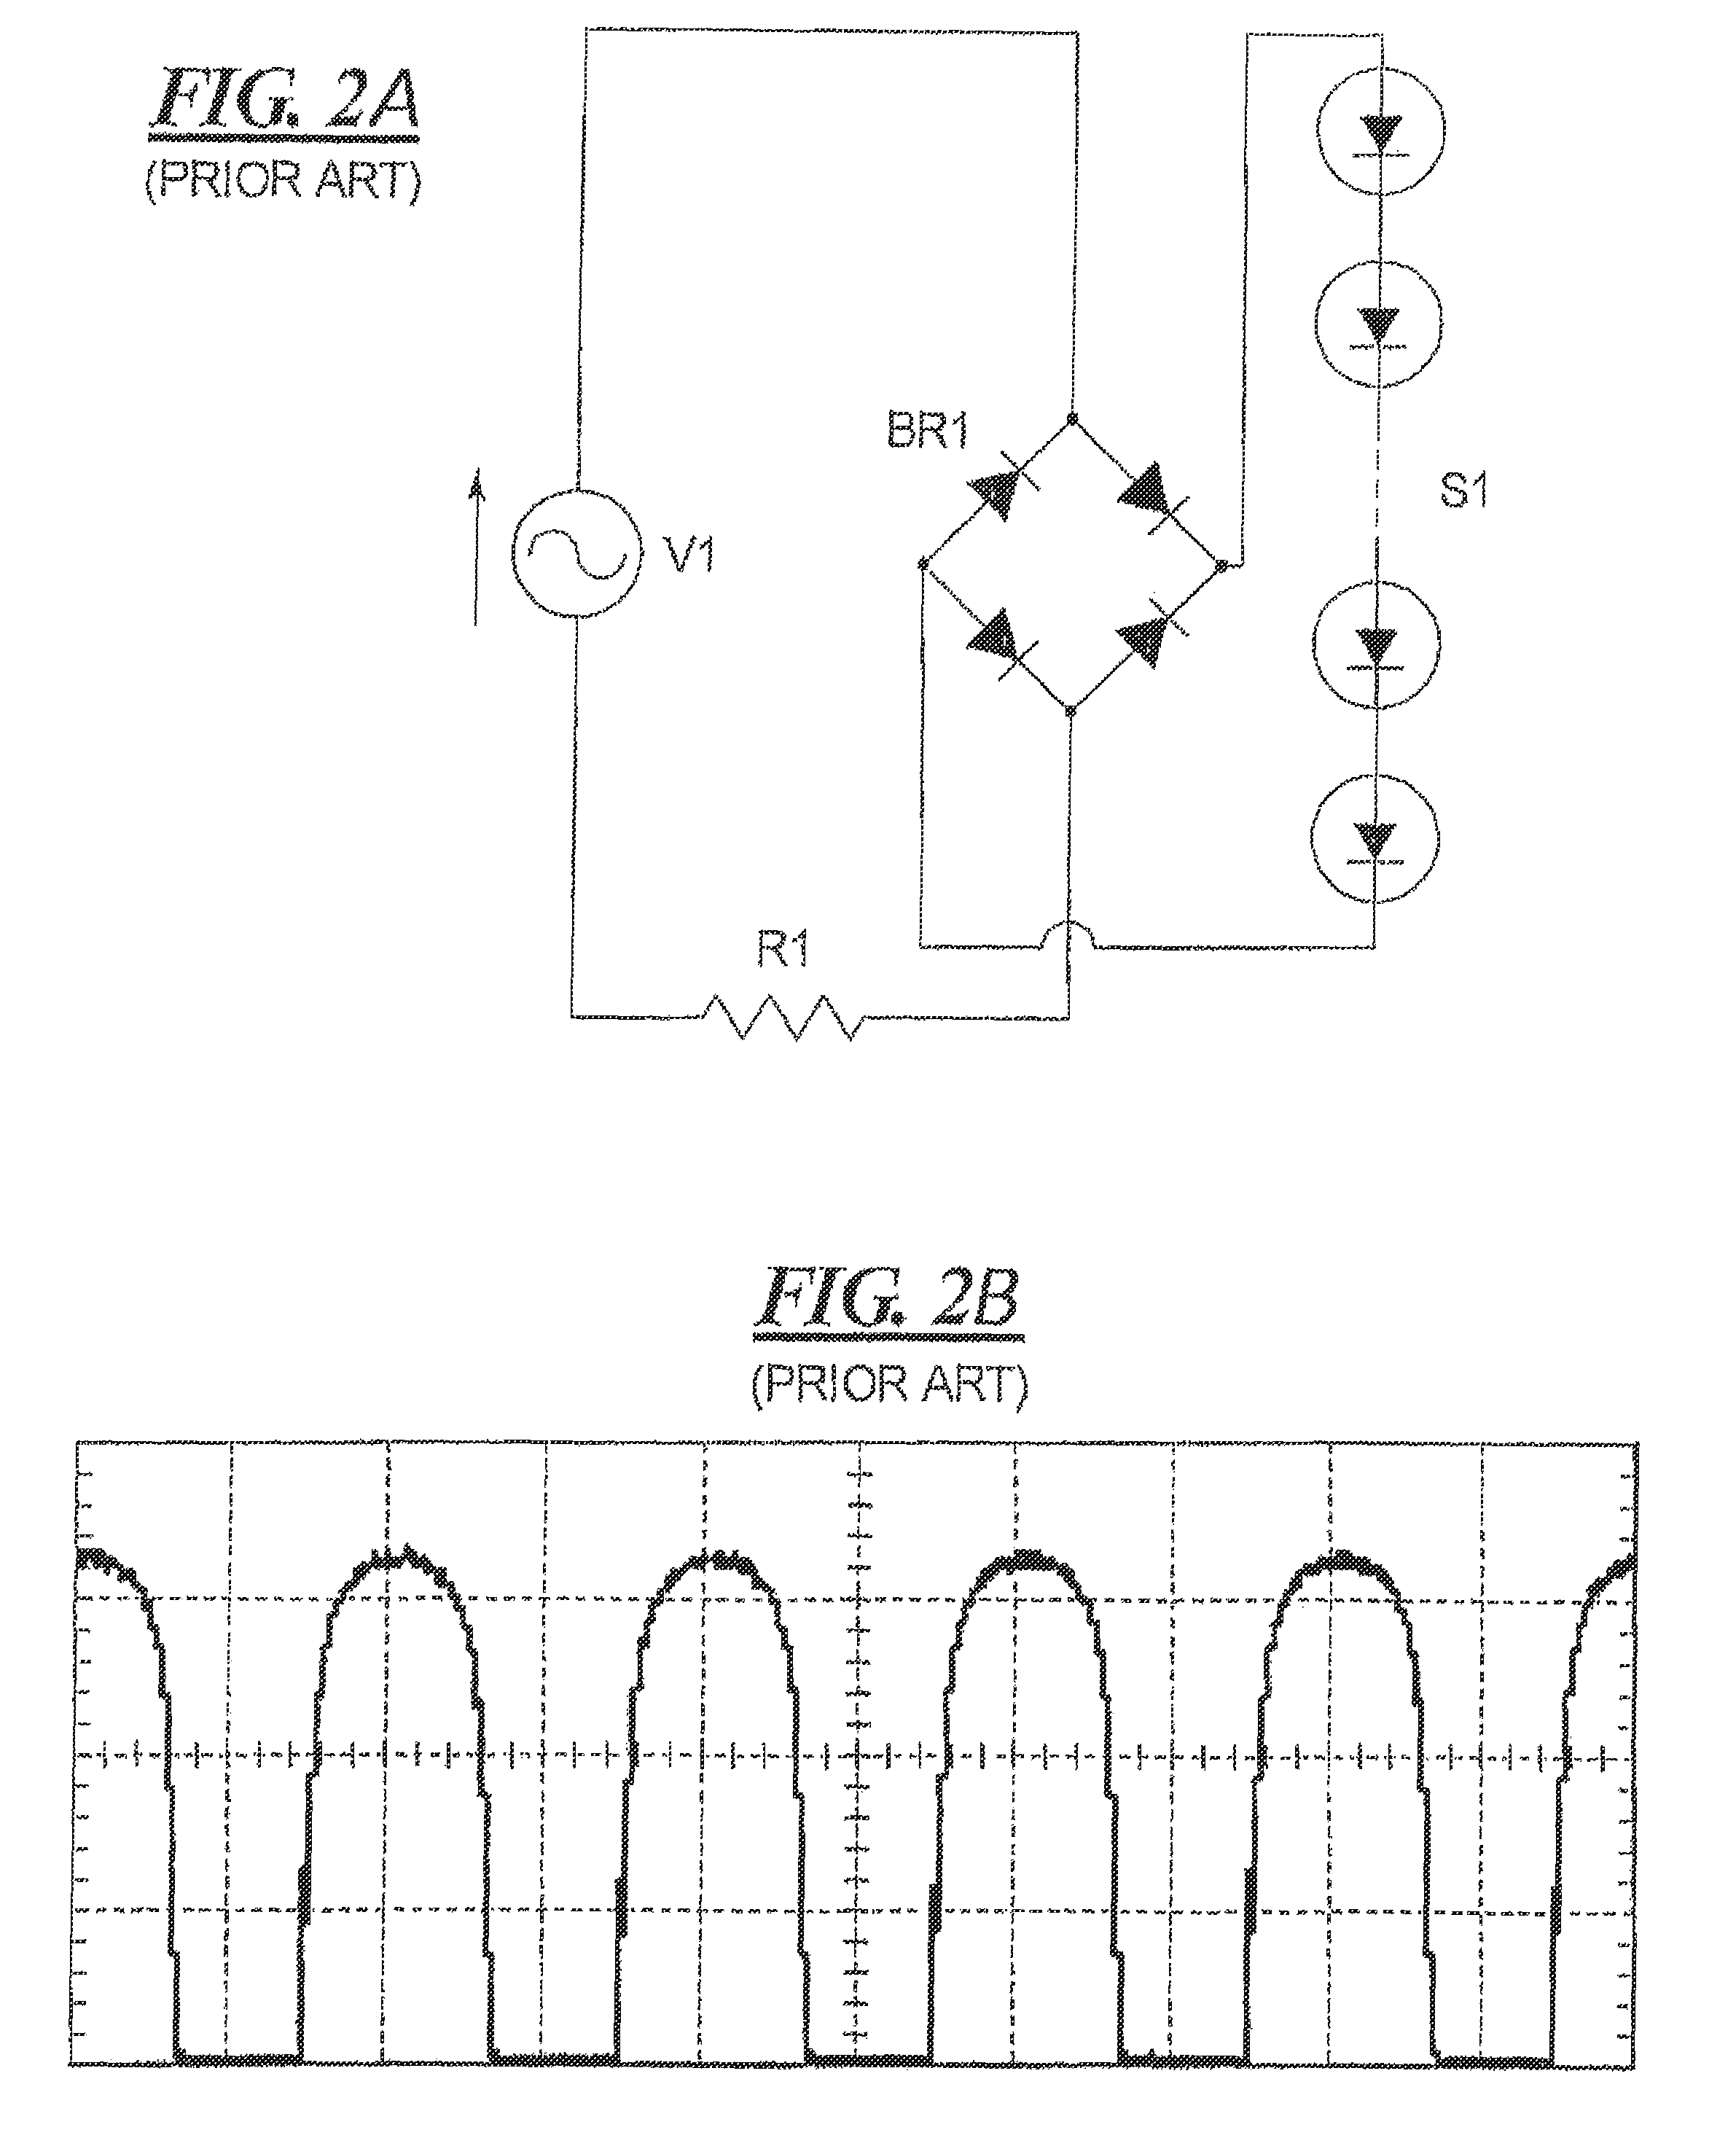 Method and arrangement for remotely driving light emitting diodes from a three-phase power source via a single phase cable system